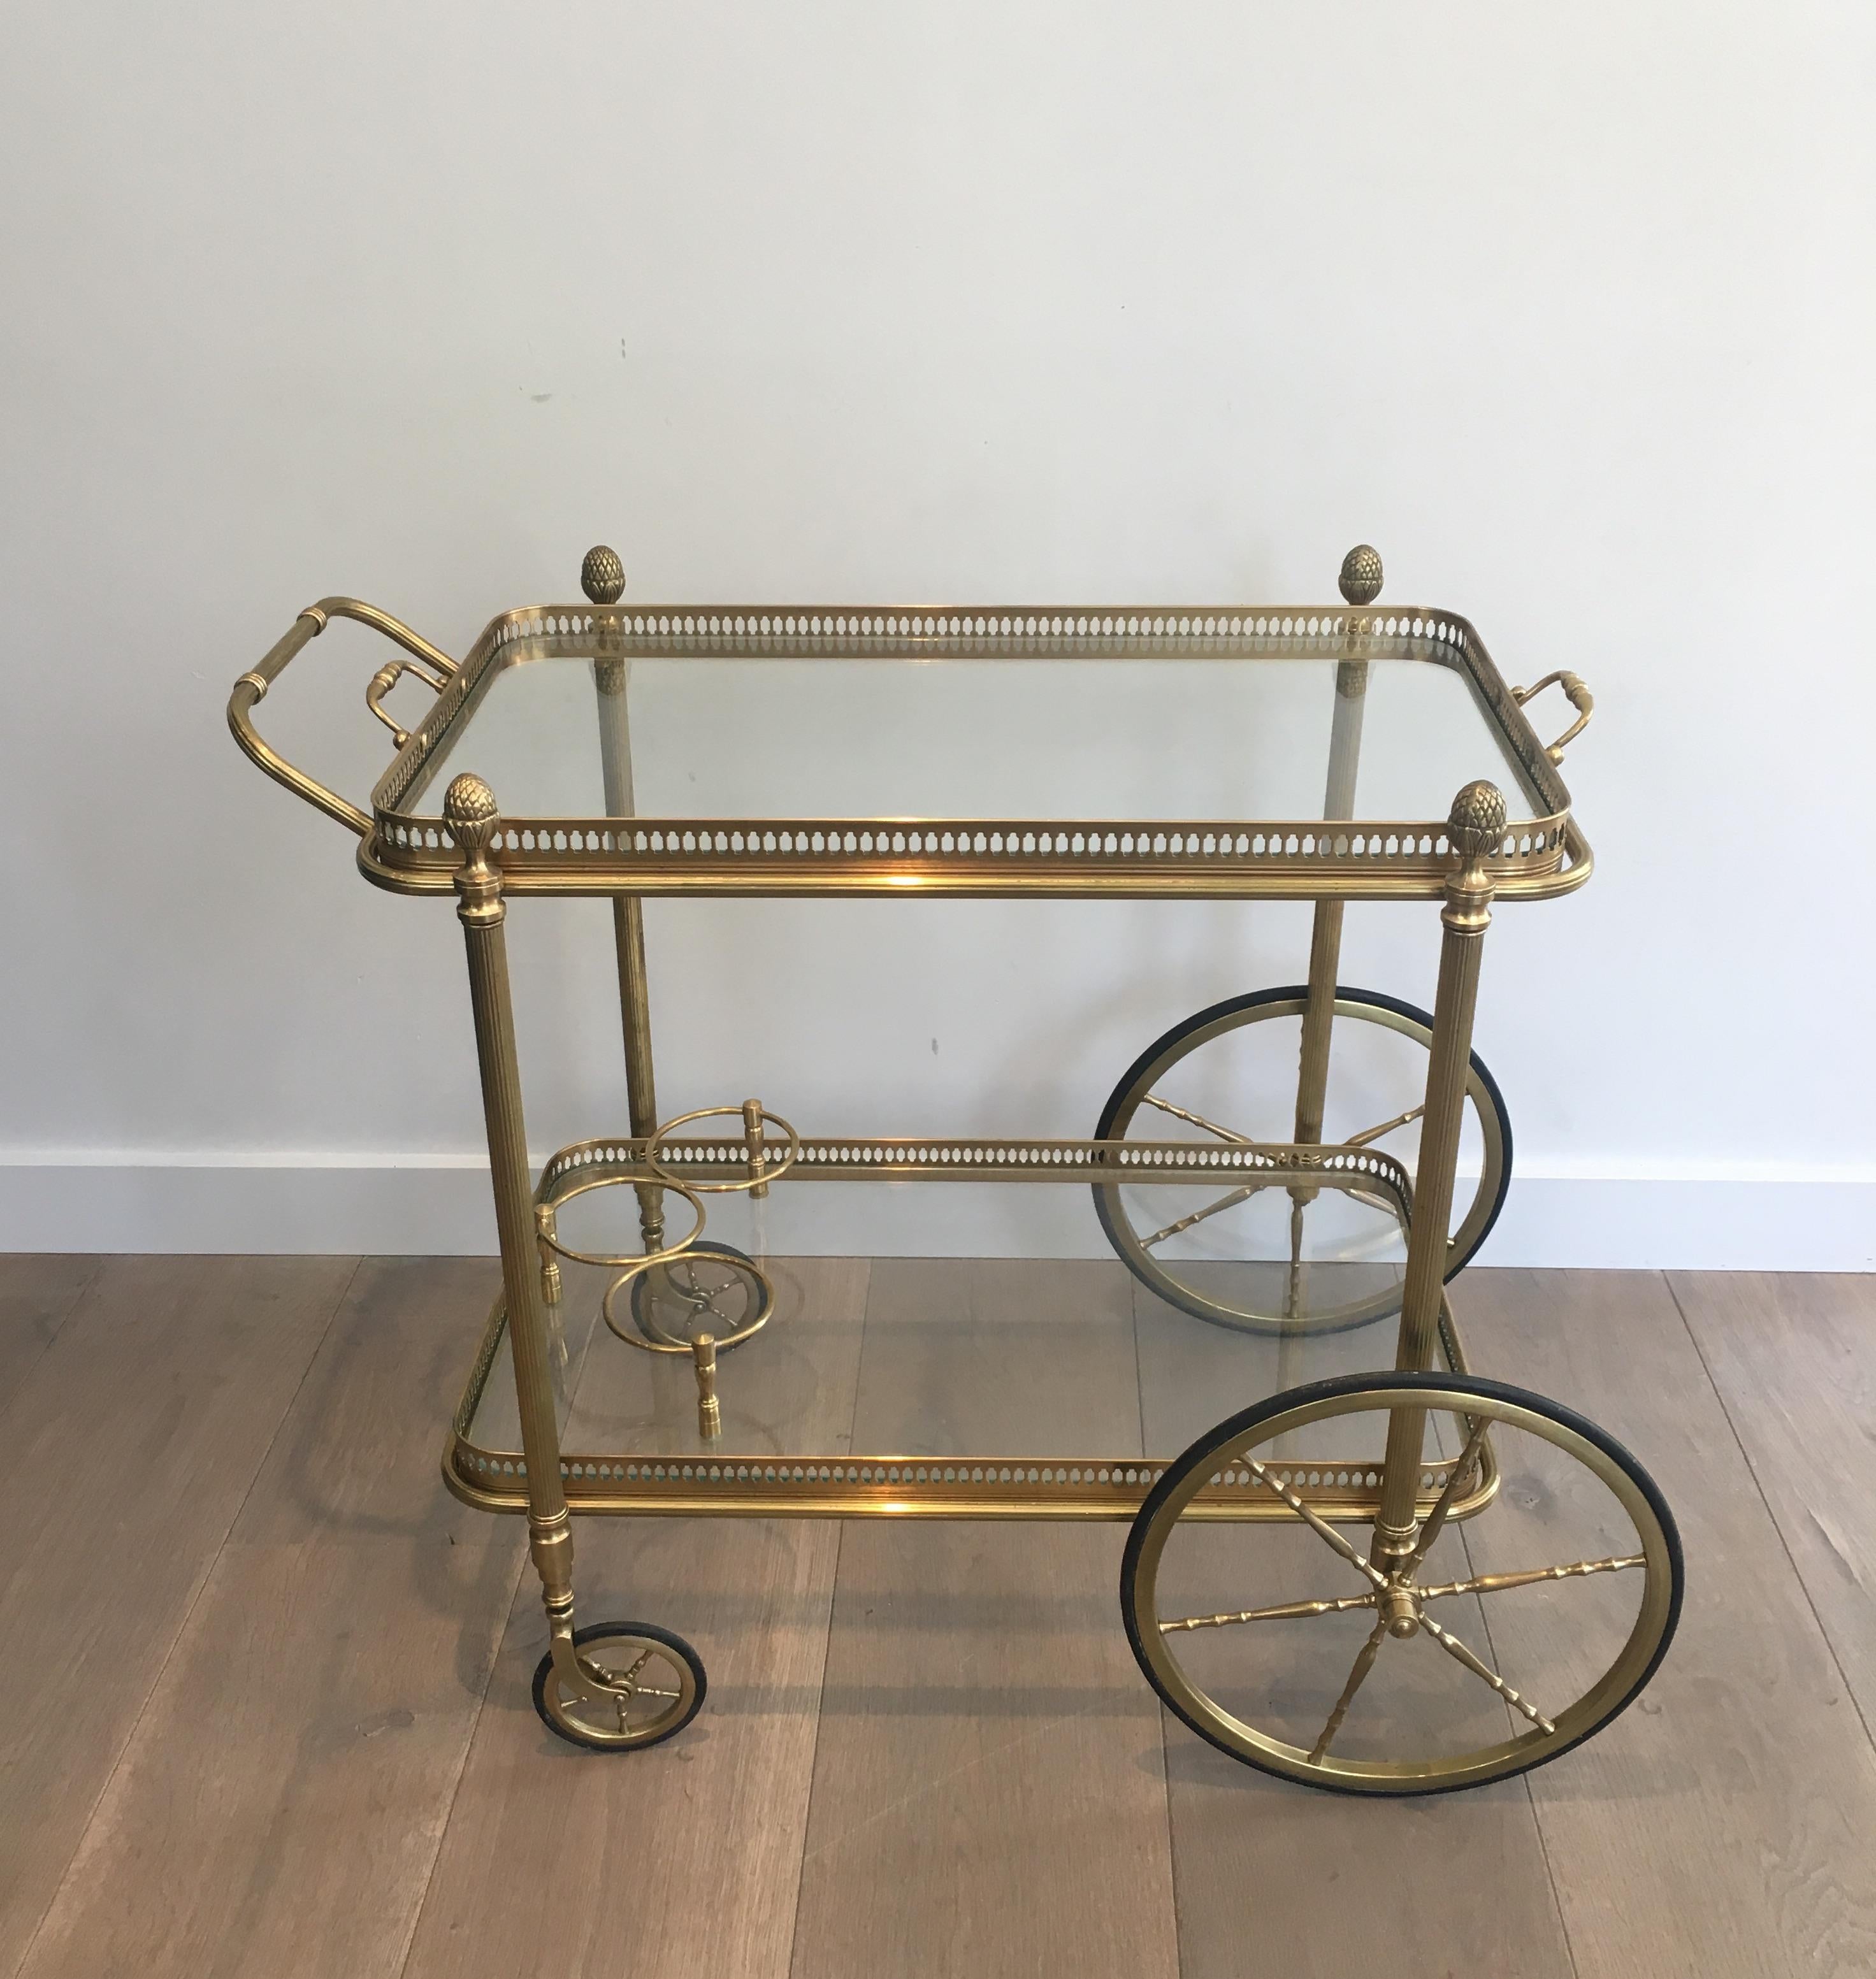 Neoclassical style brass bar cart by Maison Bagués with removable serving tray. The bottom shelf has a bottle holder.

A pair is available. 

This bar cart is currently in France, please allow 4 to 6 weeks for delivery to our warehouse in Long